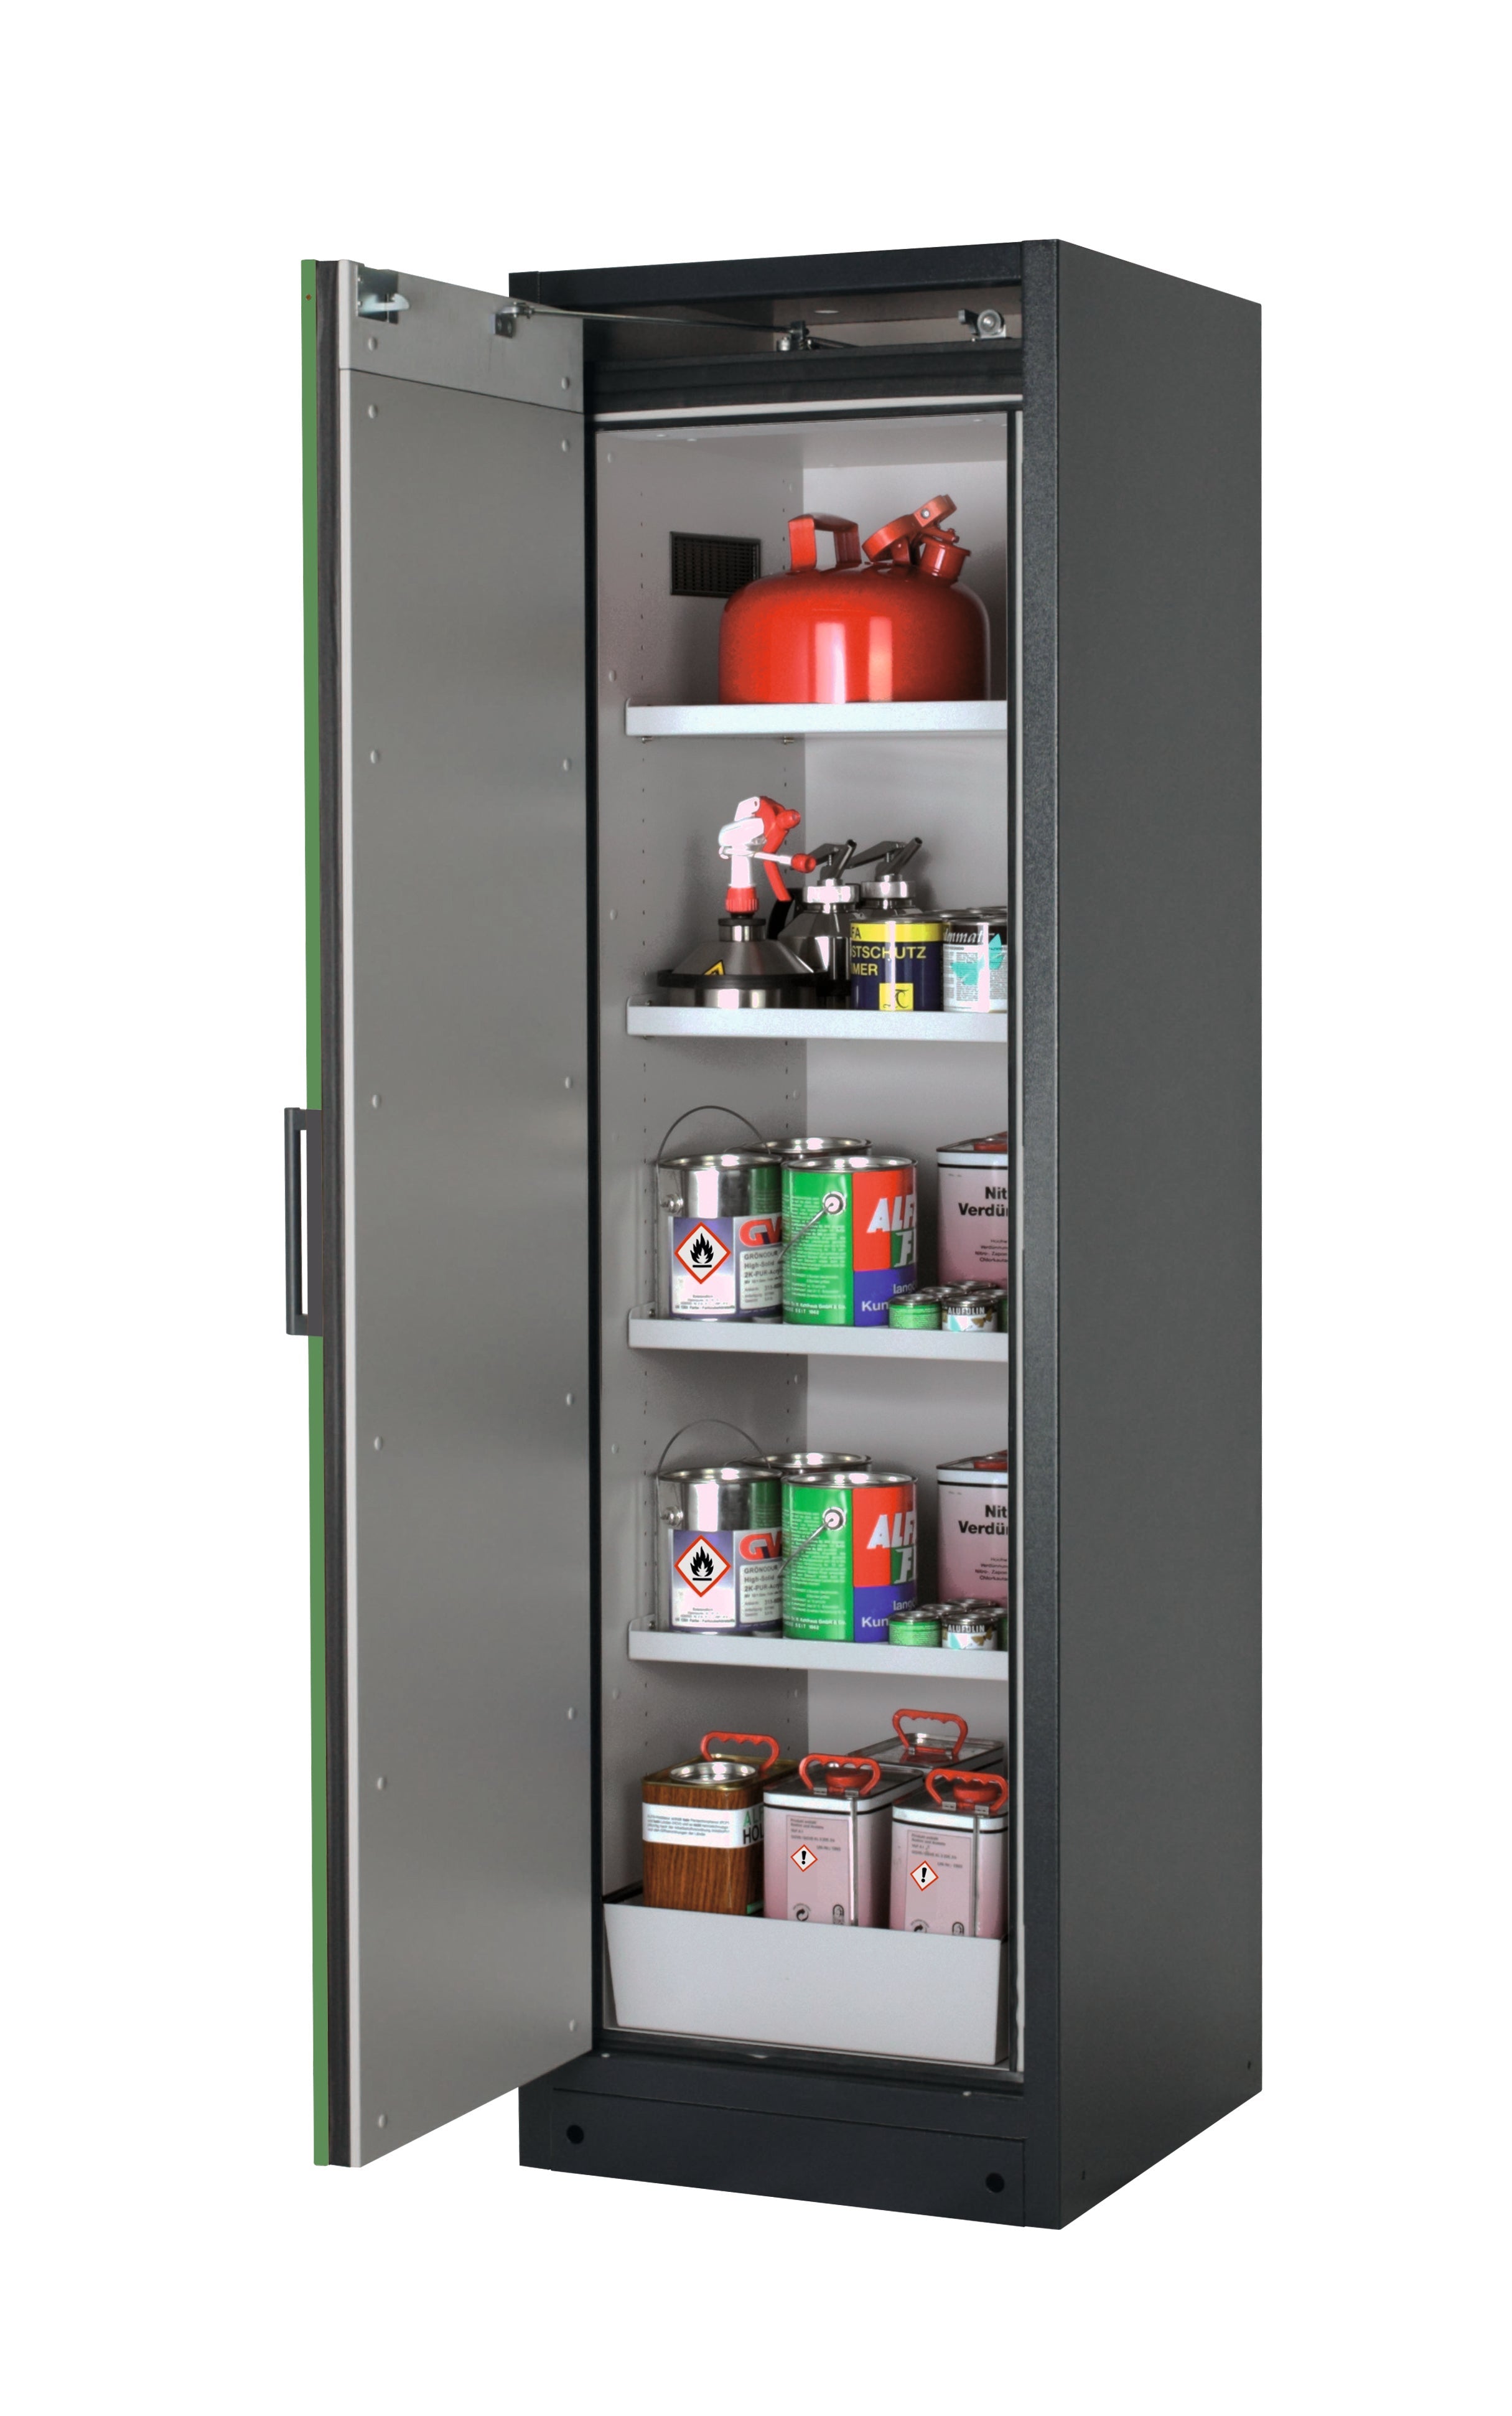 Type 90 safety storage cabinet Q-CLASSIC-90 model Q90.195.060 in reseda green RAL 6011 with 4x shelf standard (sheet steel),